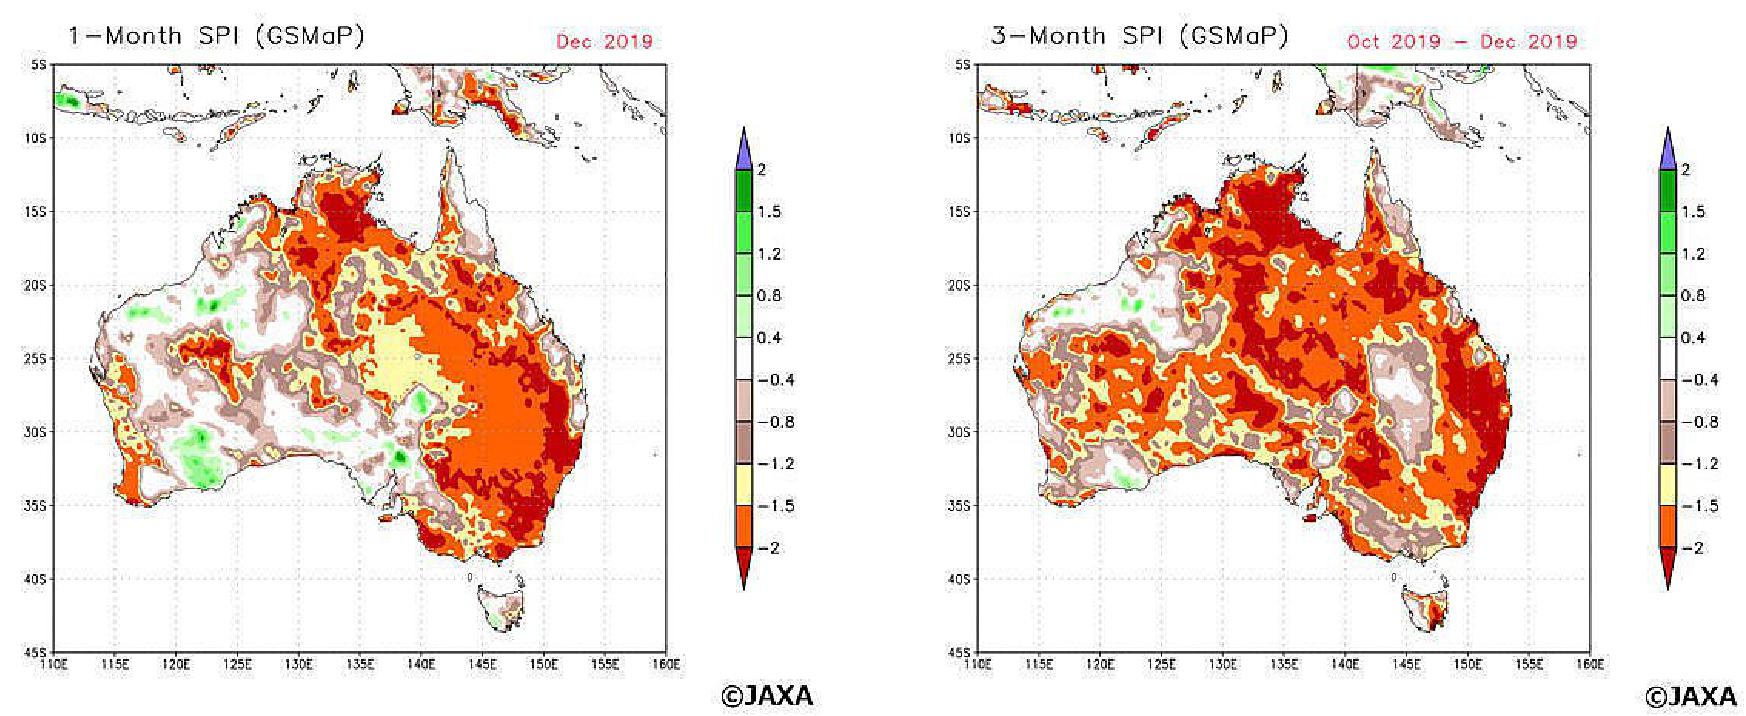 Figure 8: Left: Standardized Precipitation Index (SPI) in Australia calculated by GSMaP precipitation amount in a month (December 2019); Right: SPI calculated by GSMaP precipitation amount in three months (October-December 2019) in a same way. The relations between SPI value, the range of drought and frequency of phenomenon were classified by WMO (2012). In case SPI value becomes "-1.5 to -1.99", it indicates the situation of "Severe dryness" which happens "once in 20 years". In case SPI value becomes less than -2.0, it corresponds "Extreme dryness" which happens "once in 50 years". These conditions show the possibility of severe drought occurrence which leads to a big social impact (image credit: JAXA/EORC)